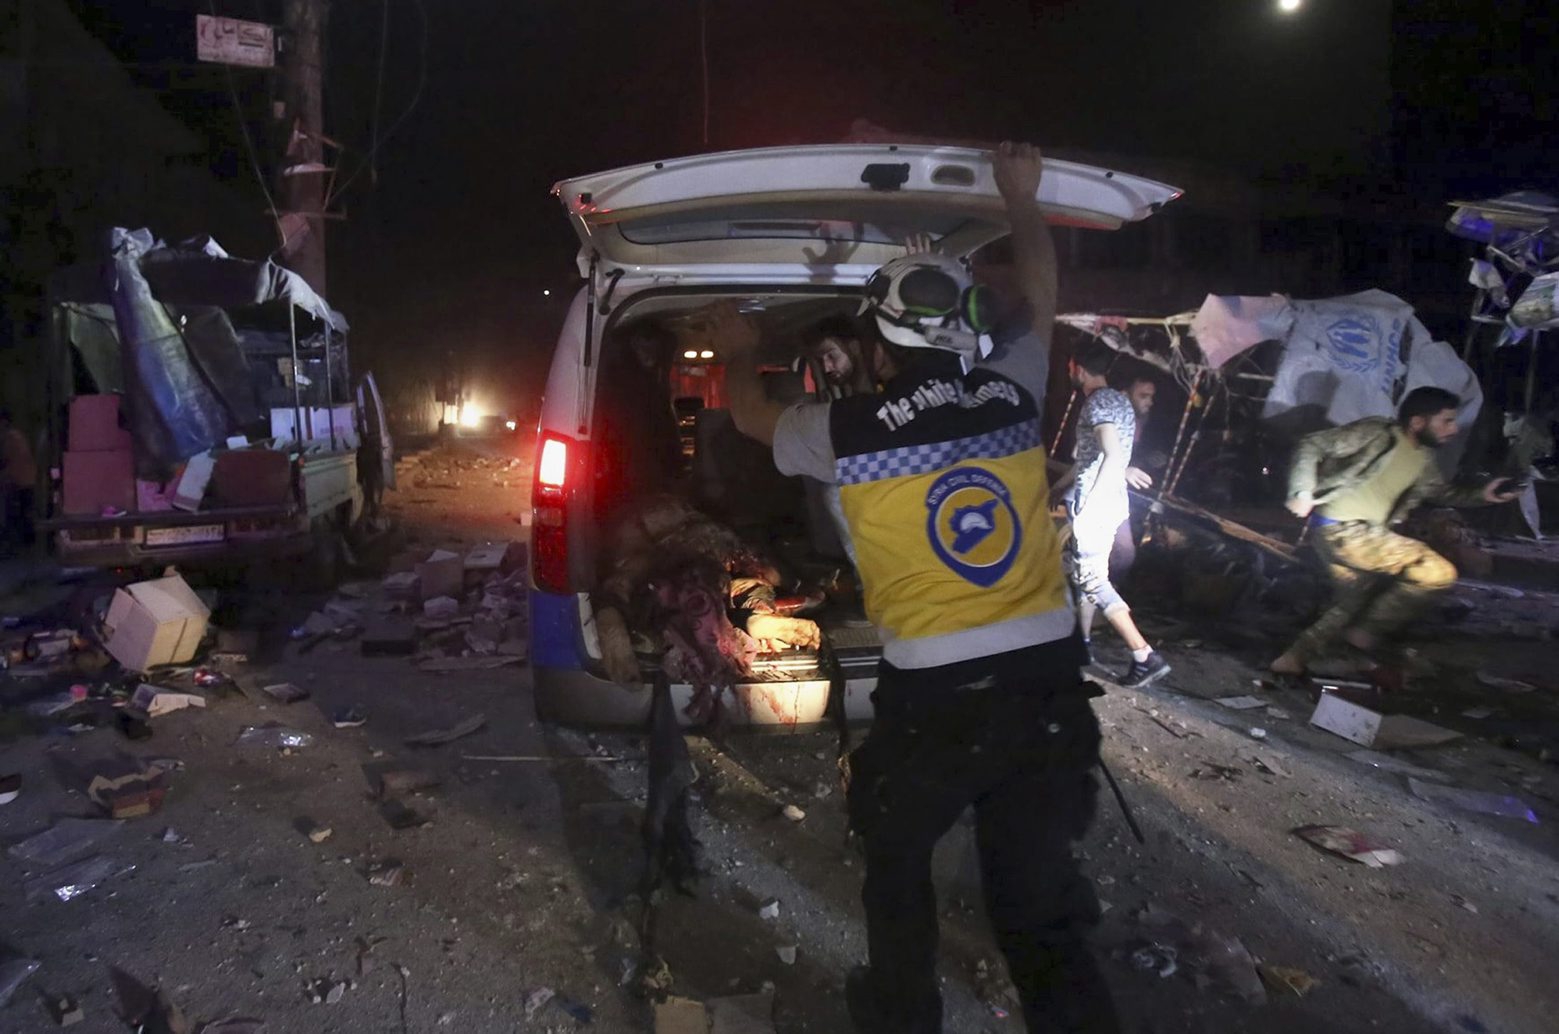 This photo provided Tuesday, May 21, 2019 by the Syrian Civil Defense group known as the White Helmets, shows Syrian White Helmet civil defense worker loading an injured man into an ambulance after Syrian government airstrikes hit the town of Maaret al-Numan, Idlib province, Syria. Syrian activists and a rebel spokesman said Wednesday that opposition fighters have recaptured Kfar Nabuda, a village at the edge of the last rebel stronghold in northwestern Syria. (Syrian Civil Defense White Helmets via AP) Syria